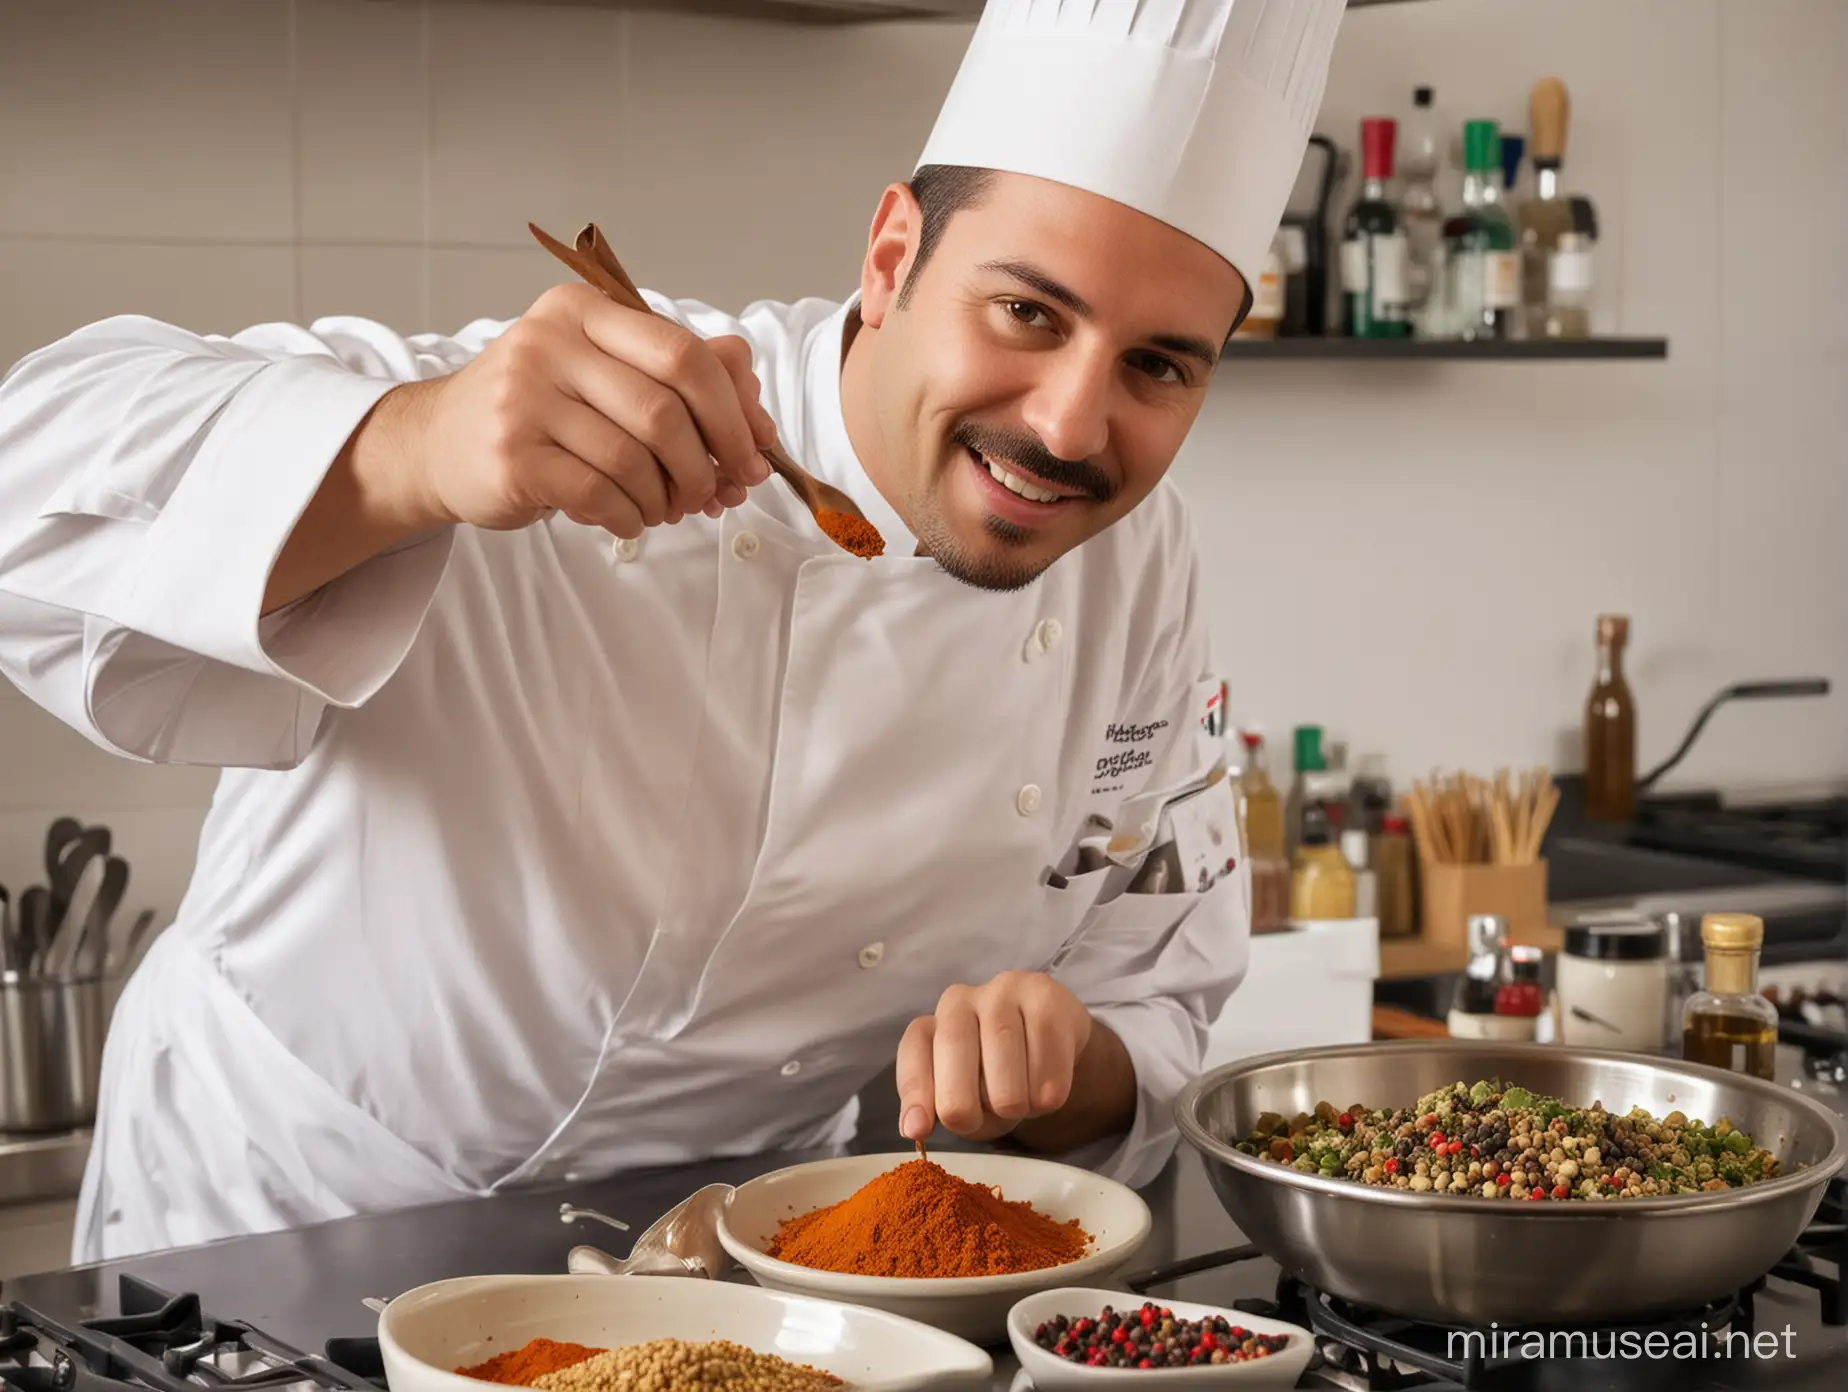 Chef adds spices to his dish in the kitchen